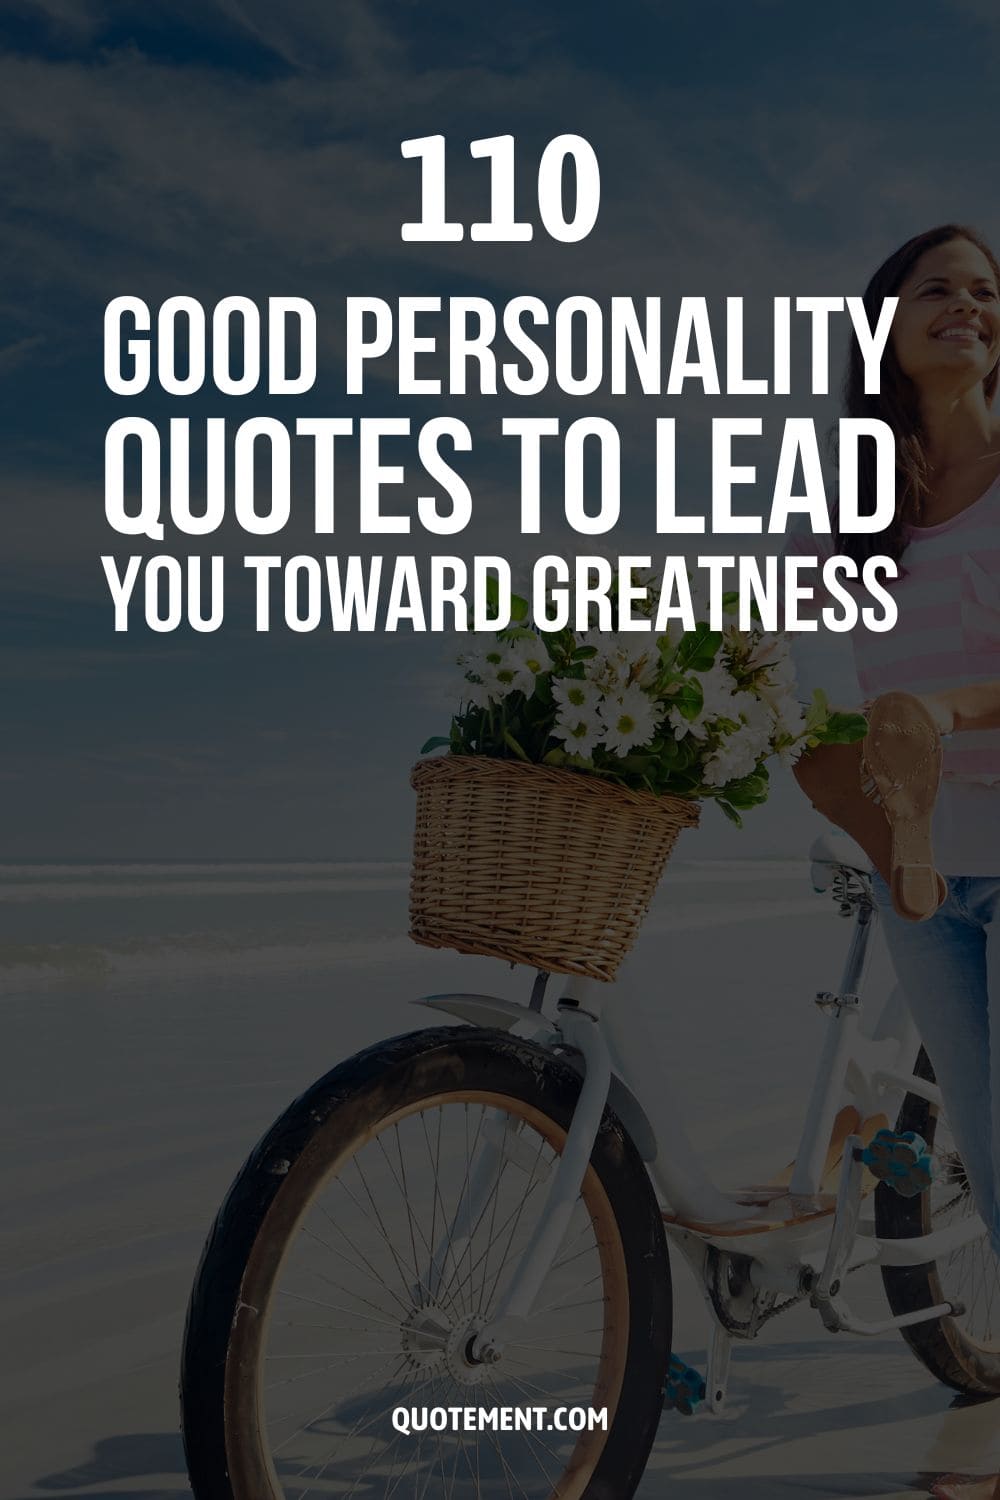 110 Quotes On Good Personality To Lead You To Greatness